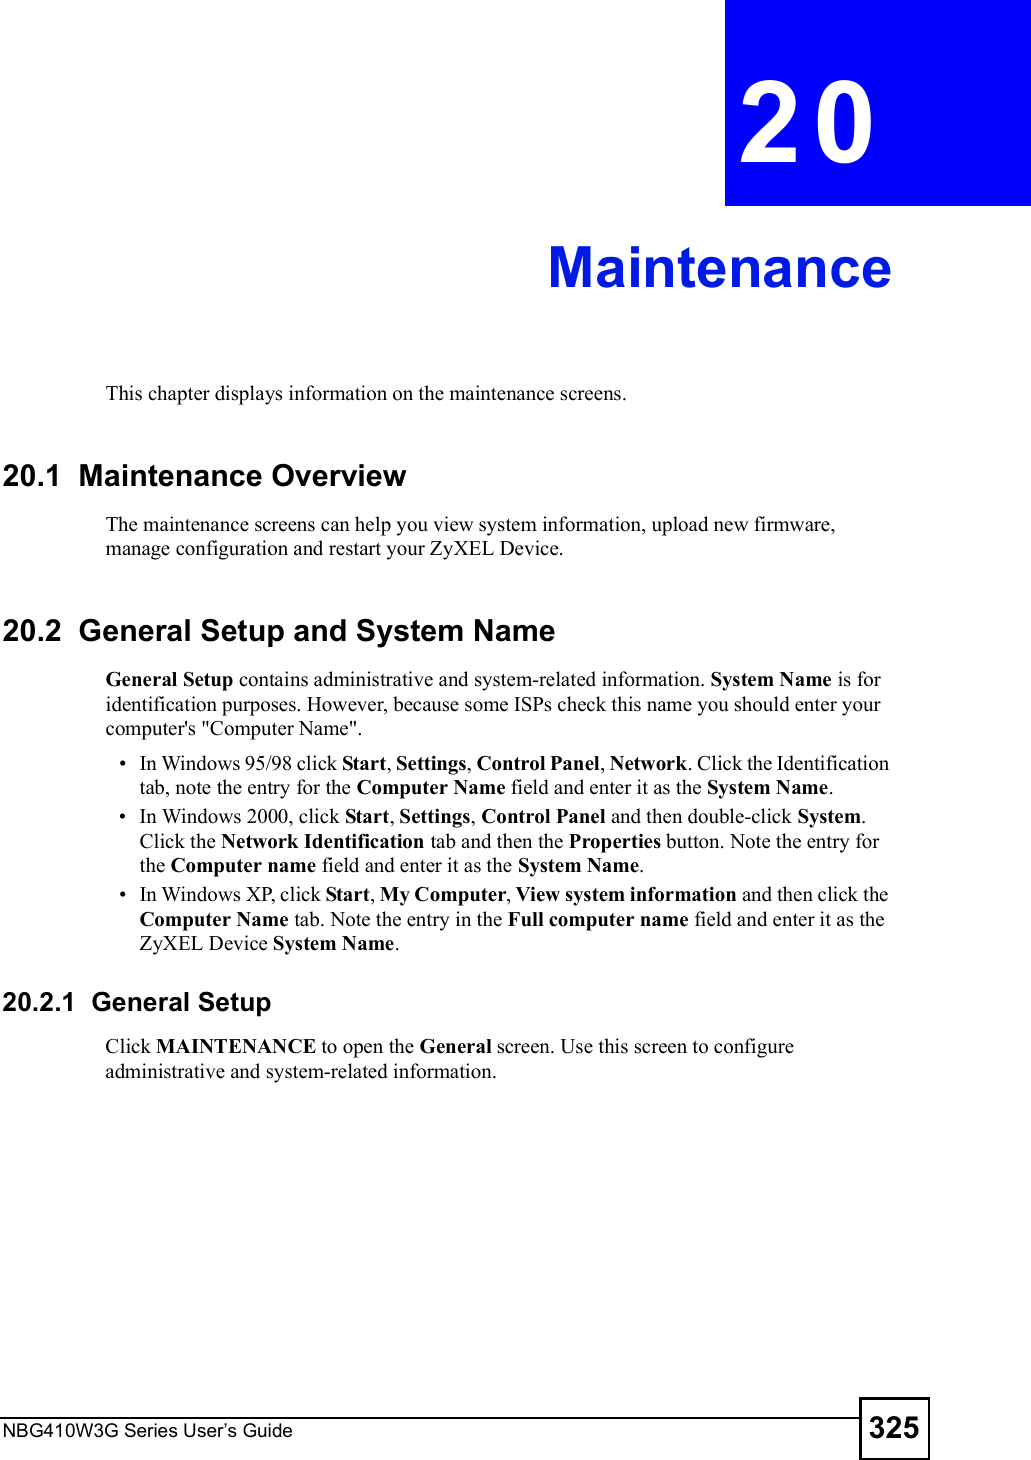 NBG410W3G Series User s Guide 325CHAPTER  20 MaintenanceThis chapter displays information on the maintenance screens.20.1  Maintenance OverviewThe maintenance screens can help you view system information, upload new firmware, manage configuration and restart your ZyXEL Device. 20.2  General Setup and System NameGeneral Setup contains administrative and system-related information. System Name is for identification purposes. However, because some ISPs check this name you should enter your computer&apos;s &quot;Computer Name&quot;.  In Windows 95/98 click Start, Settings, Control Panel, Network. Click the Identification tab, note the entry for the Computer Name field and enter it as the System Name. In Windows 2000, click Start, Settings, Control Panel and then double-click System. Click the Network Identification tab and then the Properties button. Note the entry for the Computer name field and enter it as the System Name. In Windows XP, click Start, My Computer, View system information and then click the Computer Name tab. Note the entry in the Full computer name field and enter it as the ZyXEL Device System Name.20.2.1  General Setup Click MAINTENANCE to open the General screen. Use this screen to configure administrative and system-related information.